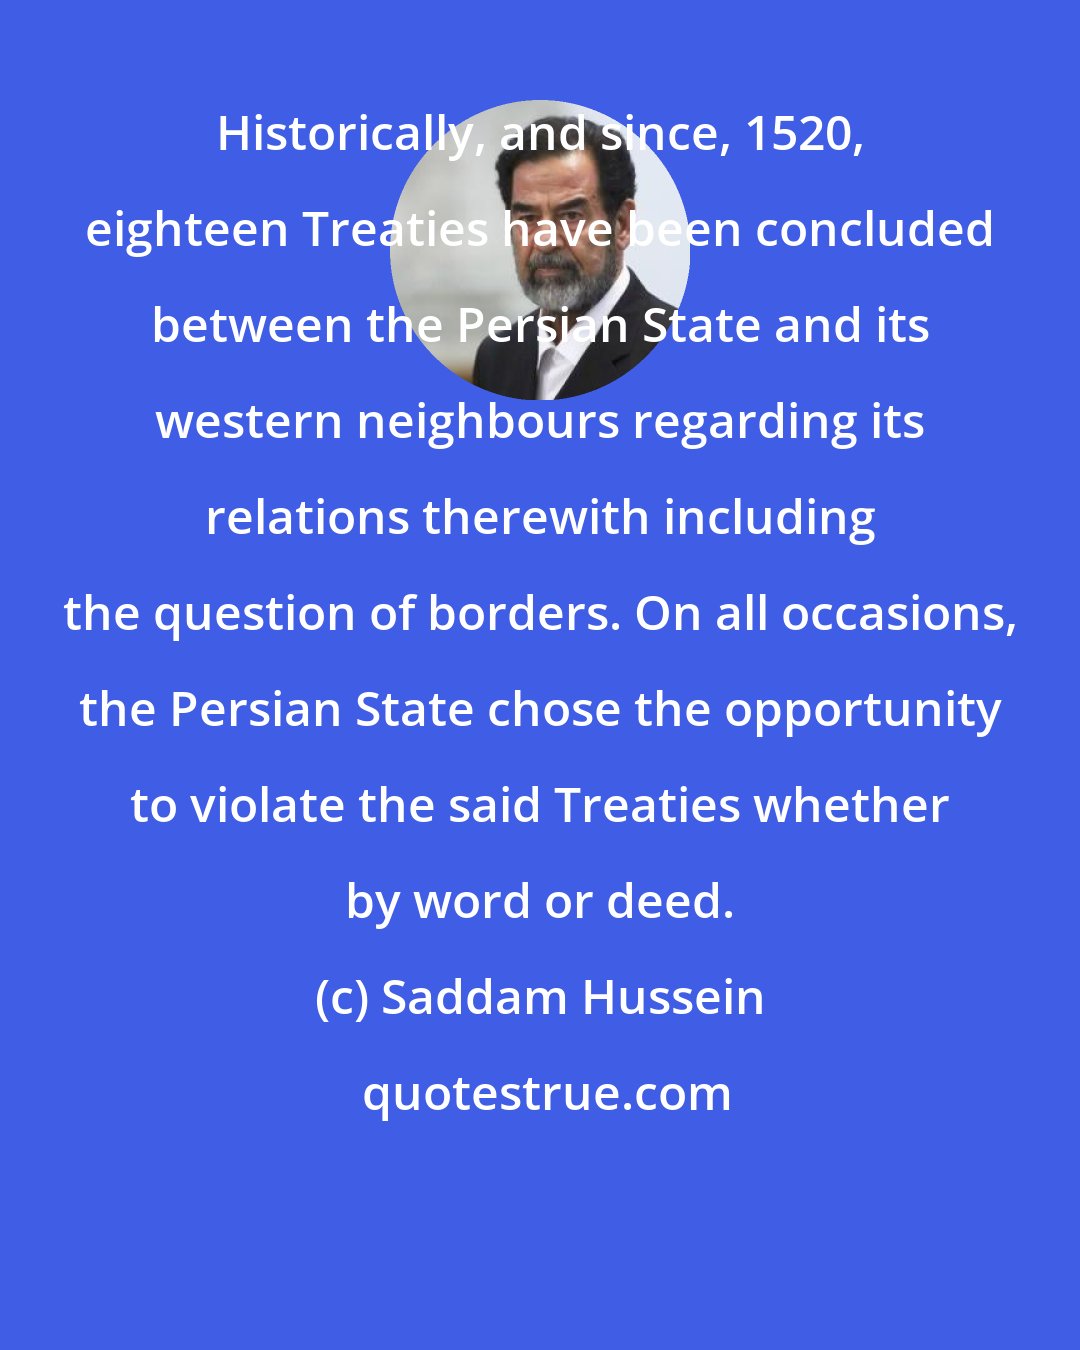 Saddam Hussein: Historically, and since, 1520, eighteen Treaties have been concluded between the Persian State and its western neighbours regarding its relations therewith including the question of borders. On all occasions, the Persian State chose the opportunity to violate the said Treaties whether by word or deed.